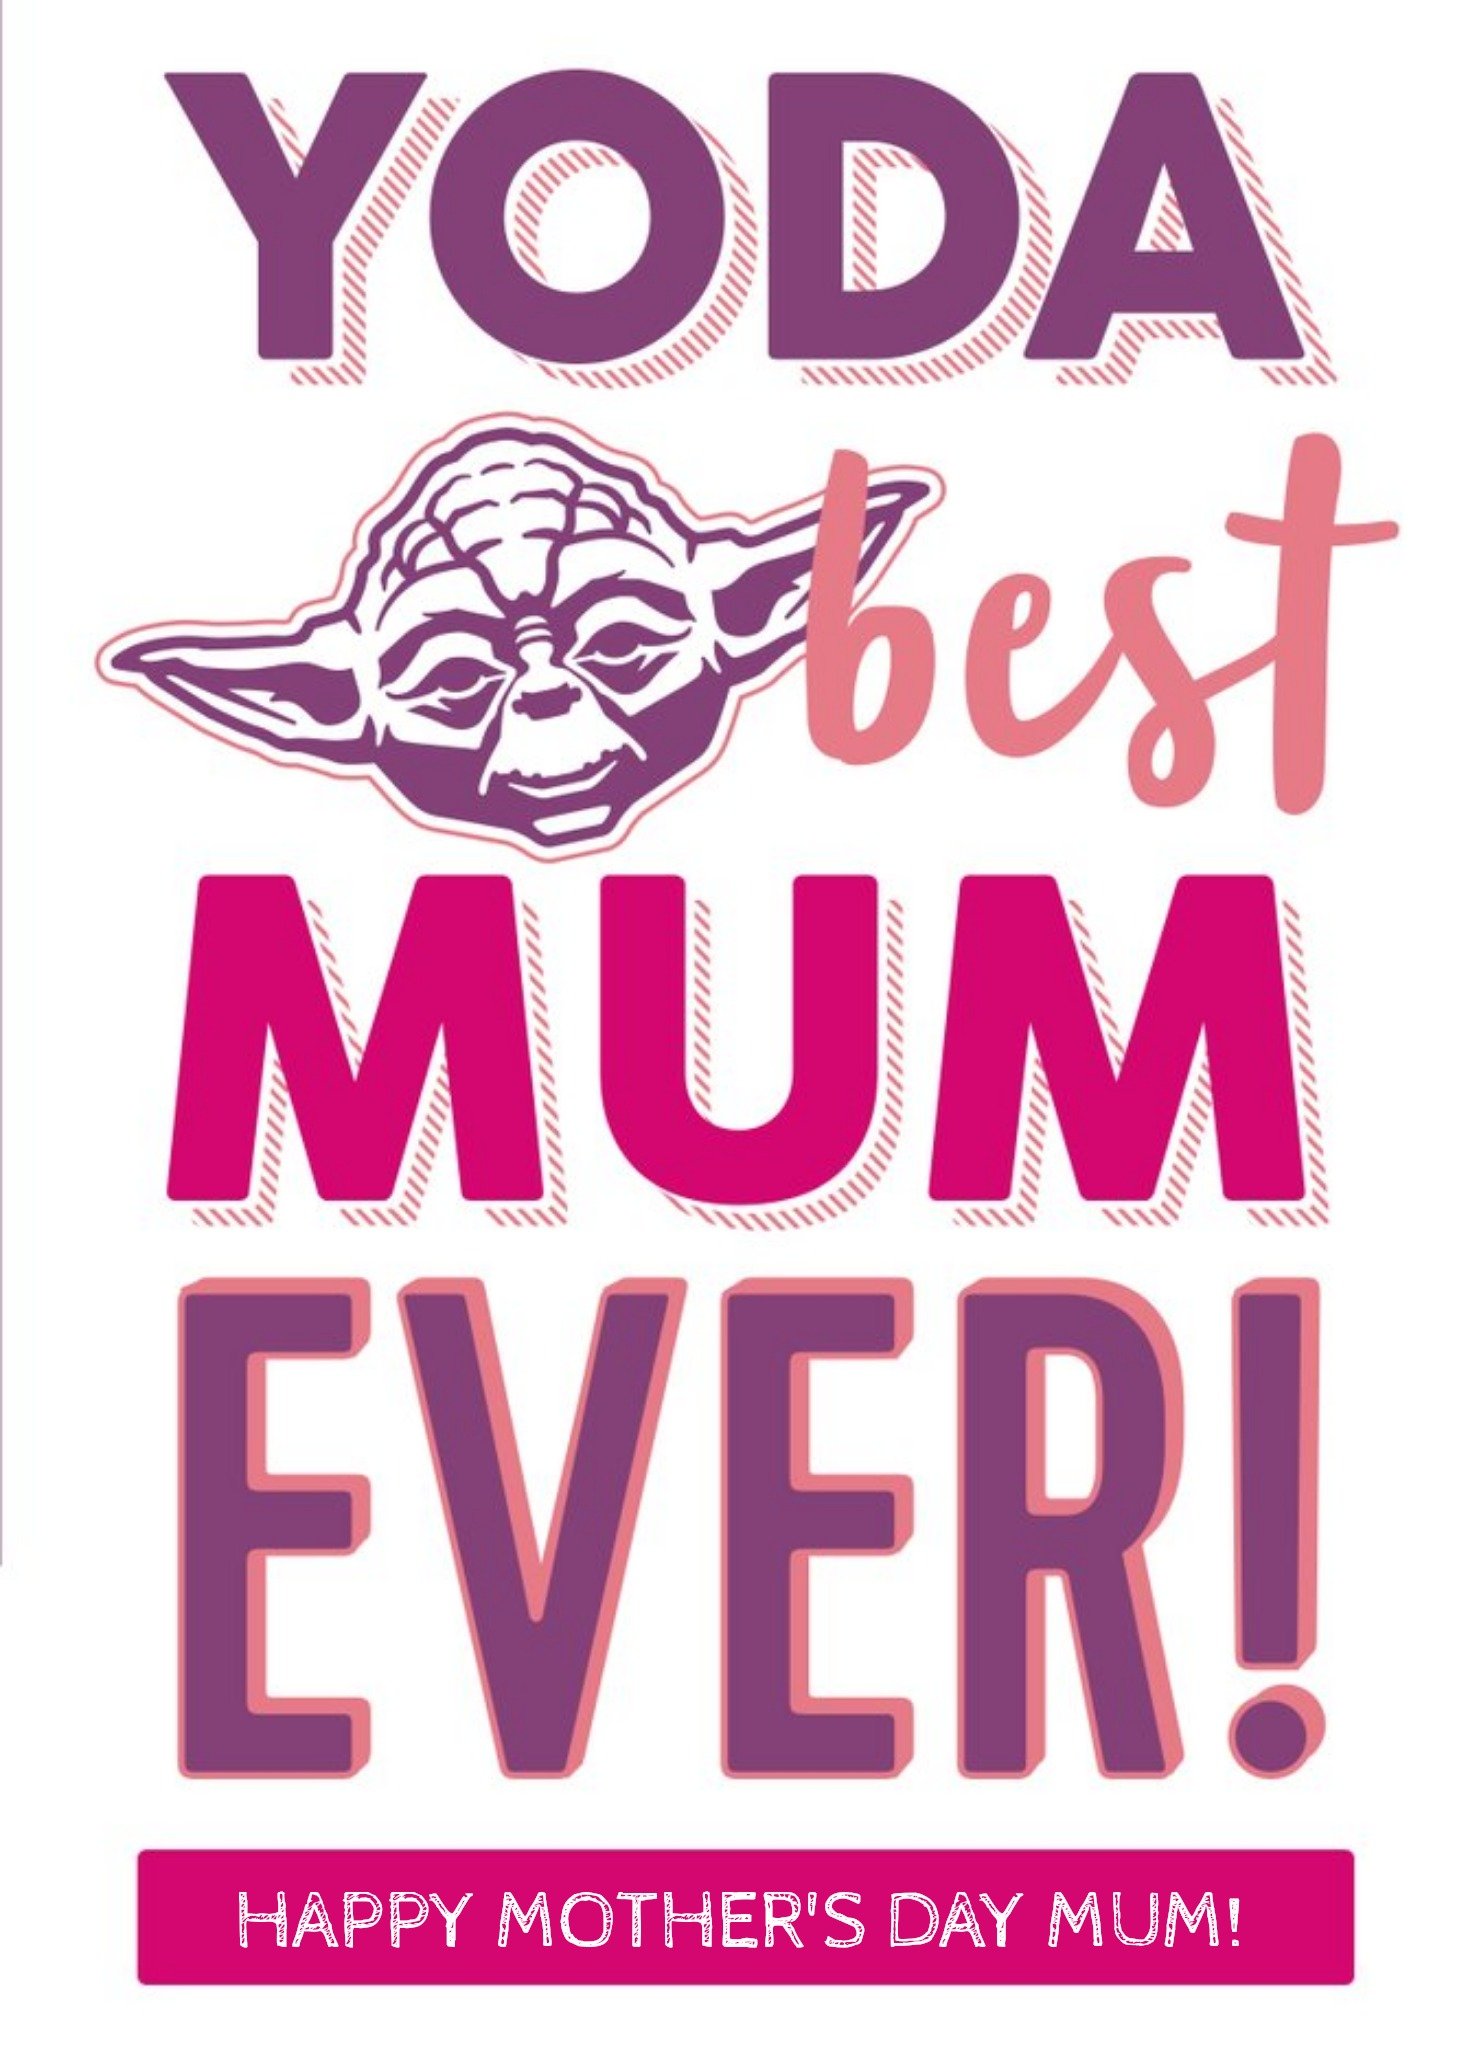 Disney Star Wars Yoda Best Mum Ever Personalised Mother's Day Card, Large